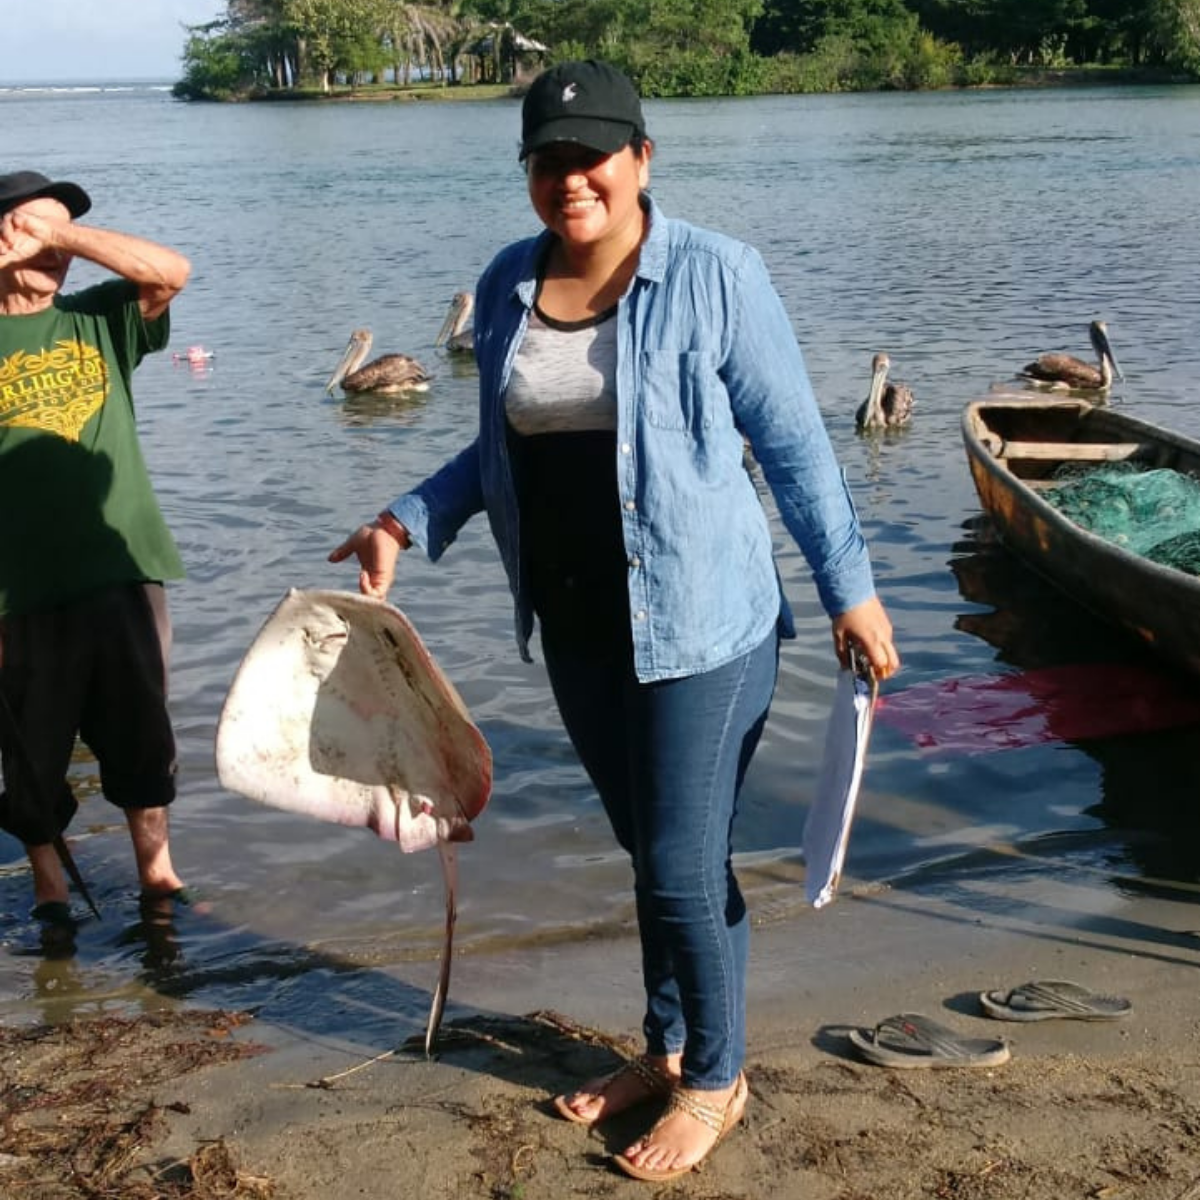 Ana Valdez helps carry the catch from the boat to be measured